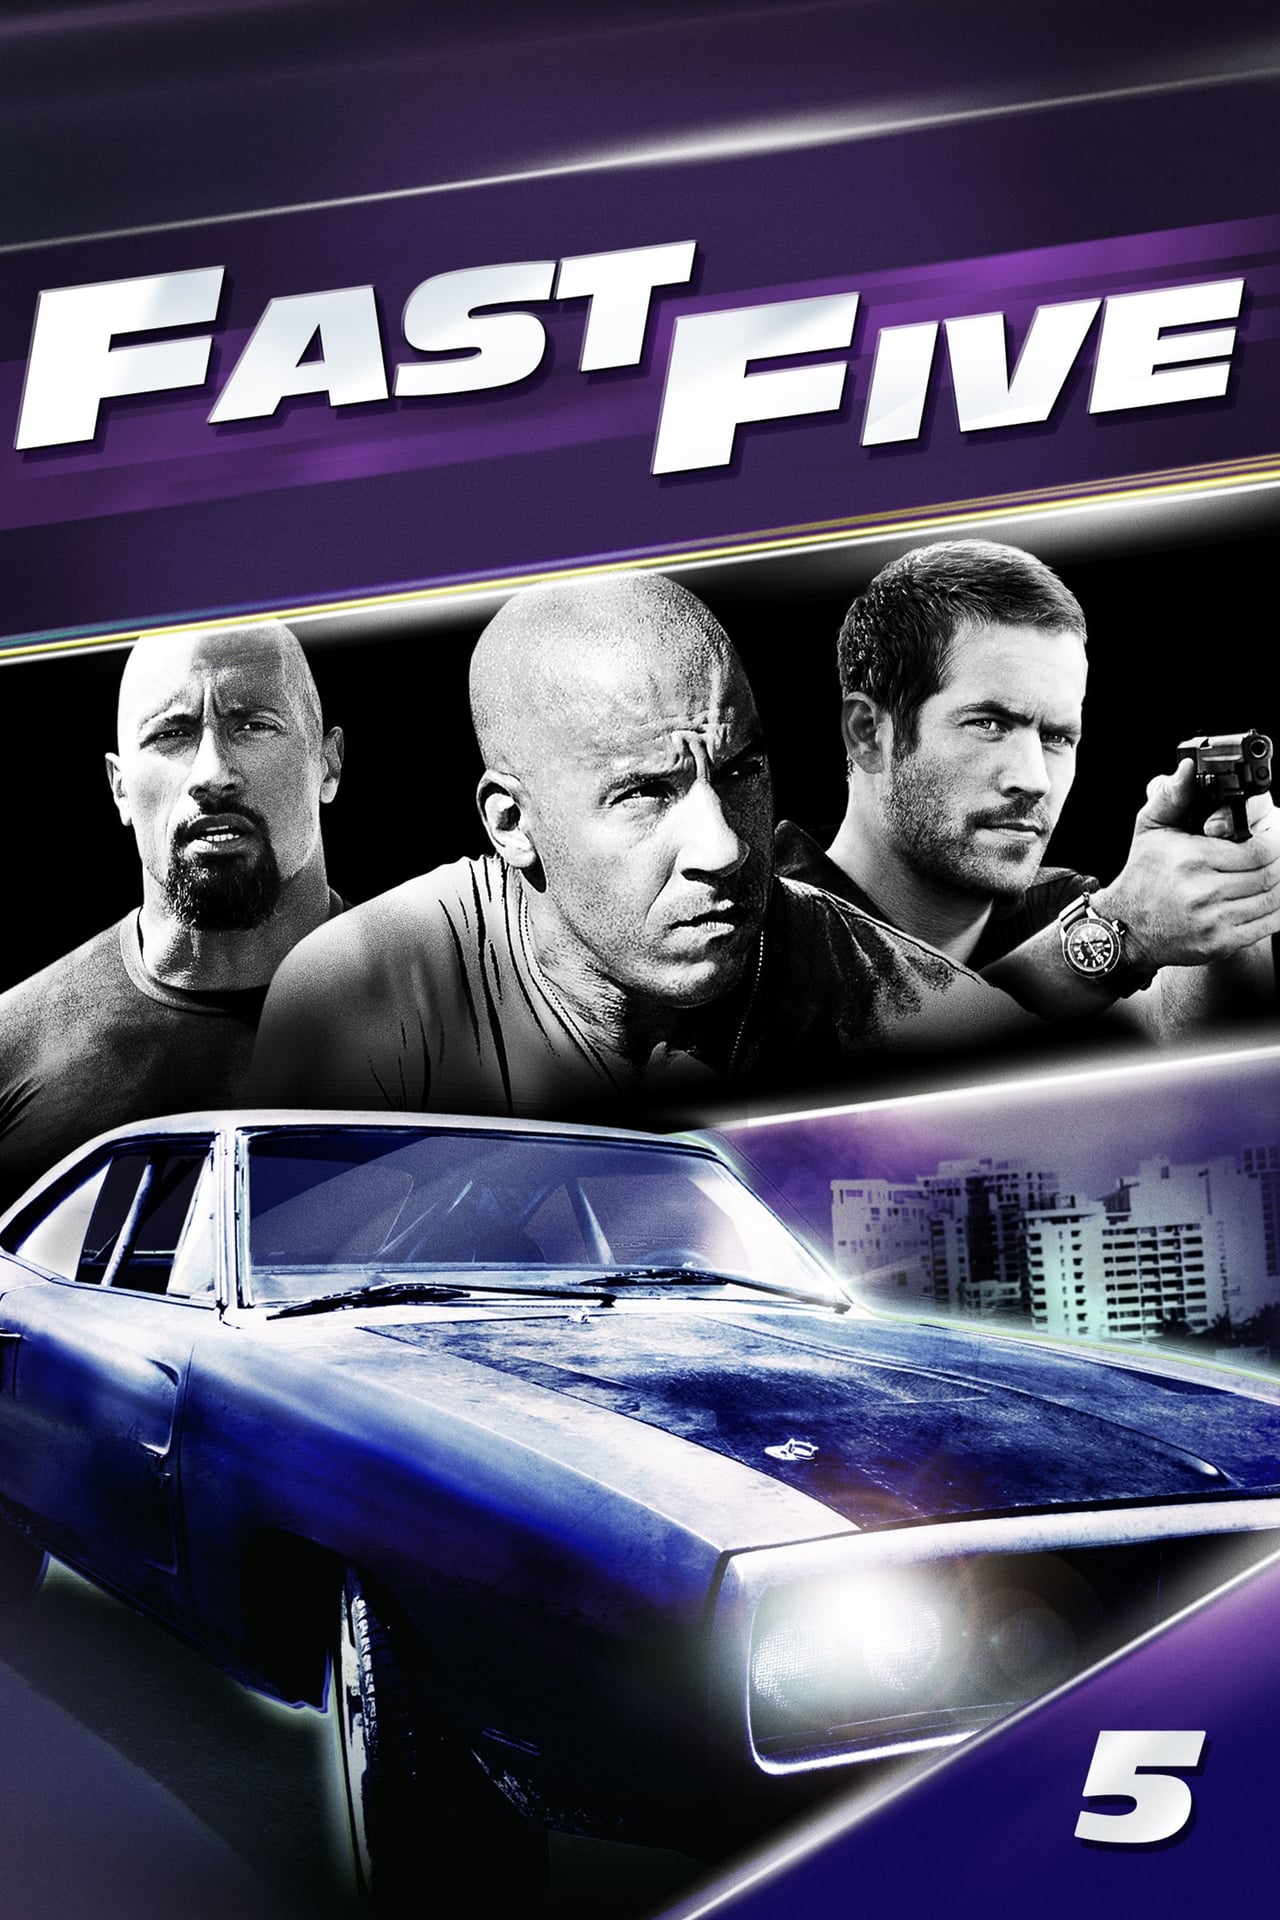 Download Fast And Furious 5 – Fast Five (2011) Full Movie In HD Dual Audio (Hin-Eng)